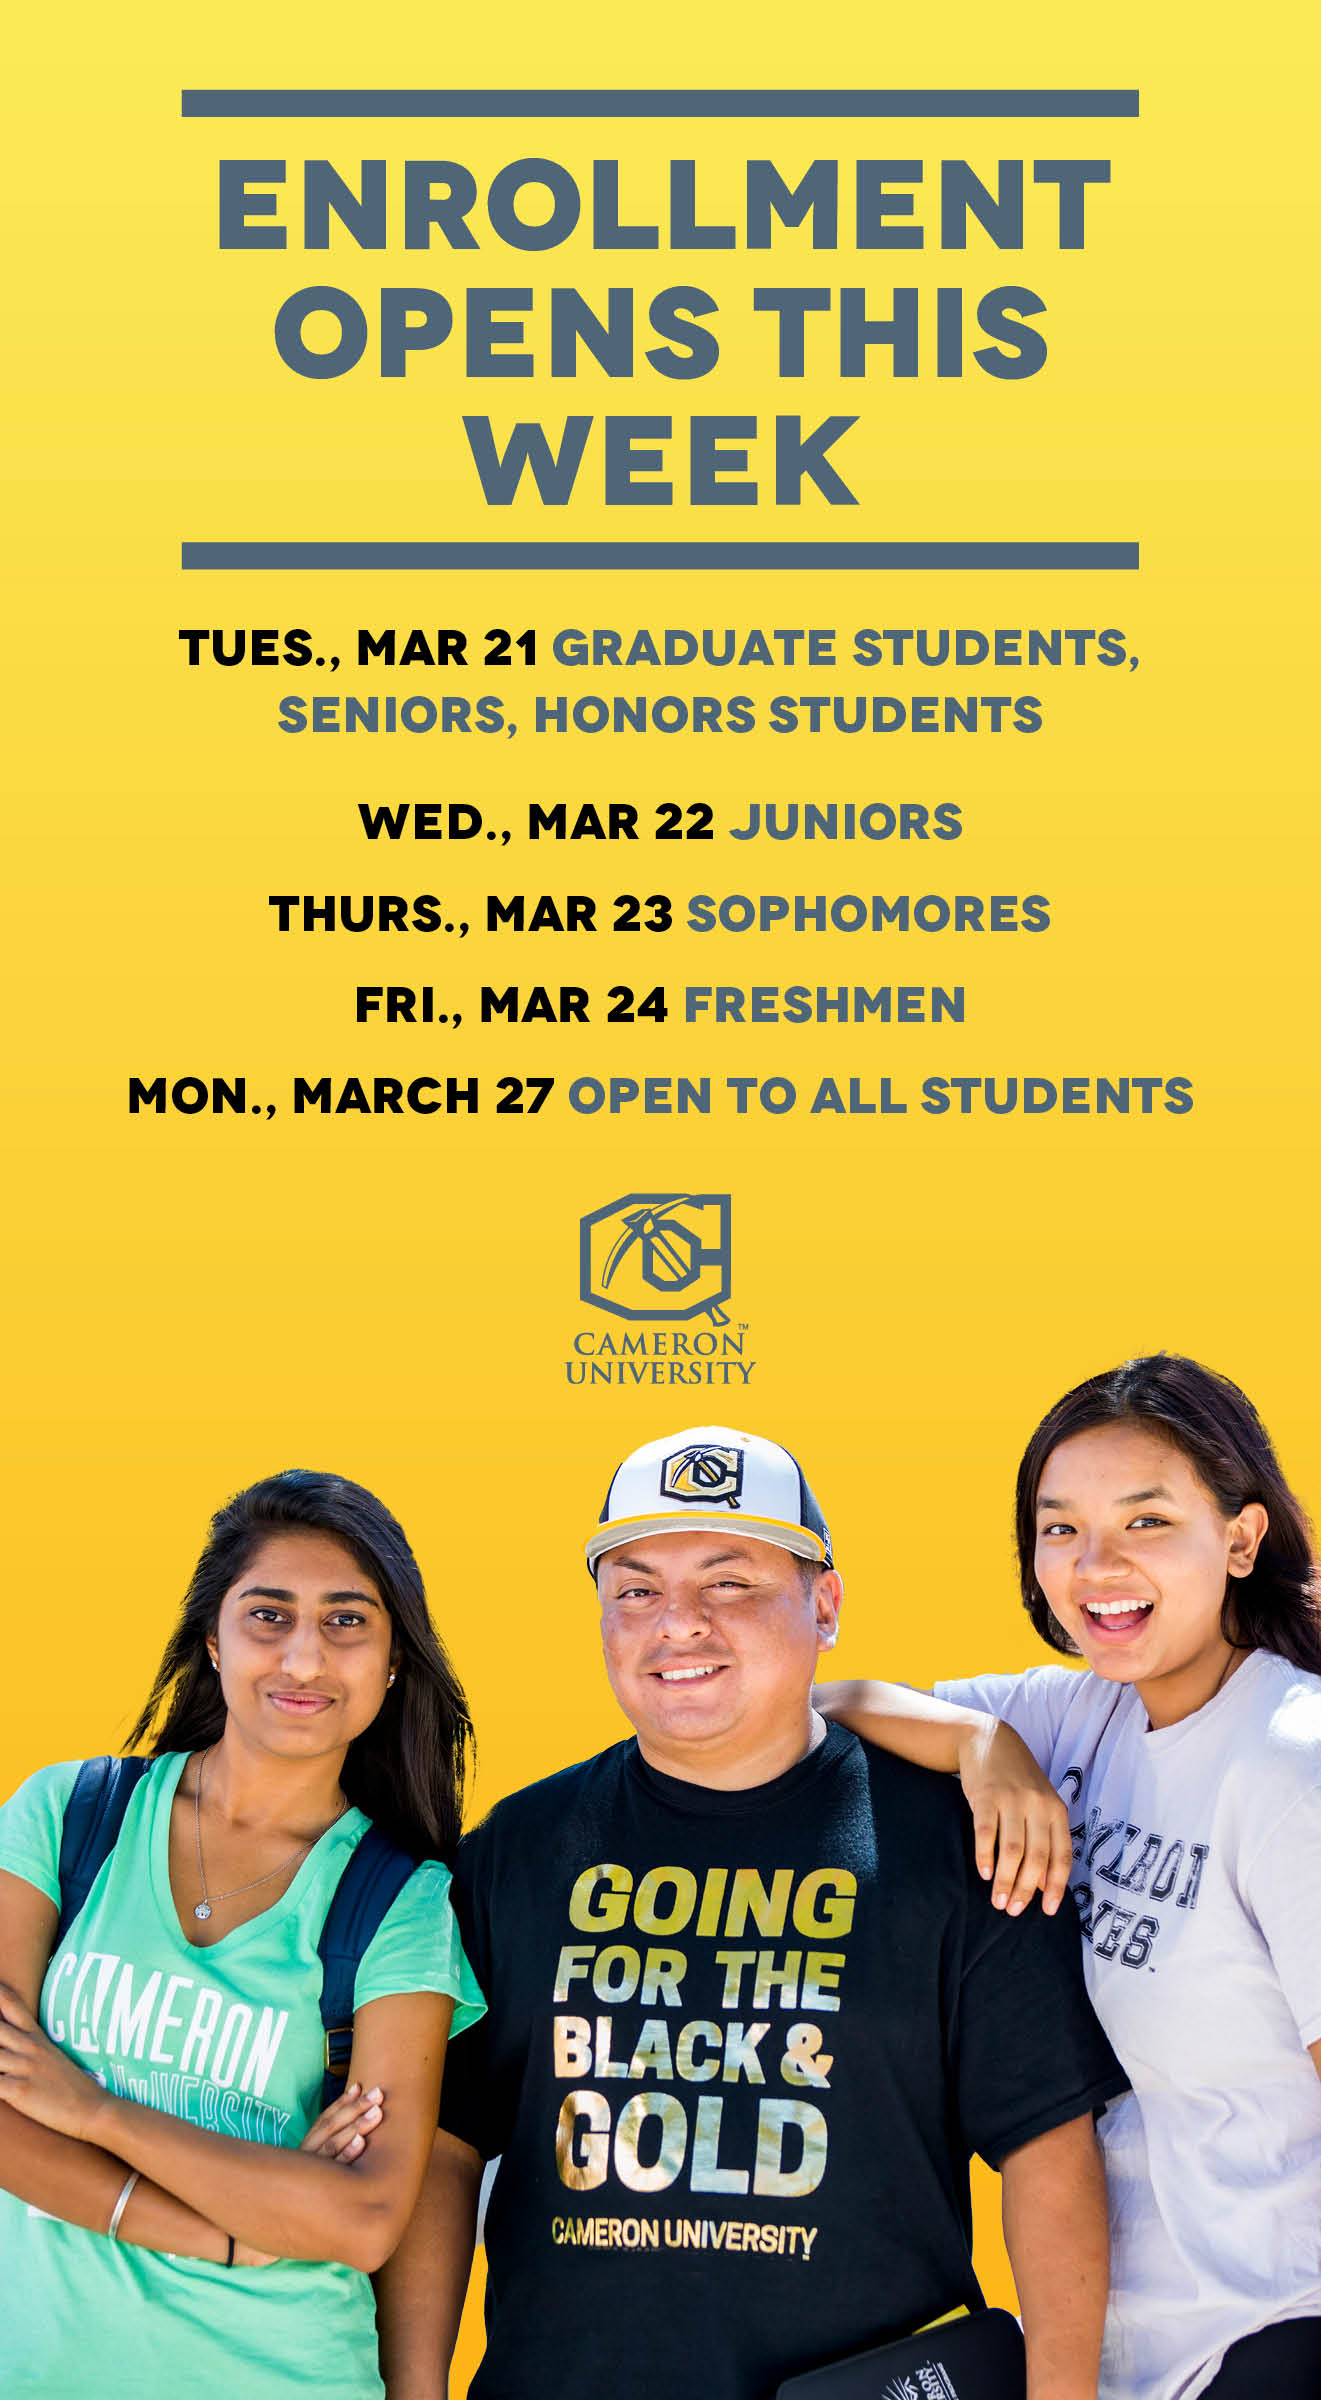 Enrollment opens this week. 
Tuies March 21 Graduate Students, Seniors, Honors Students
Wed March 22 Juniors
Thur mar 23 Sophomores
Fri Mar 24 Freshmen
Mon March 27 open to all students

cameron university